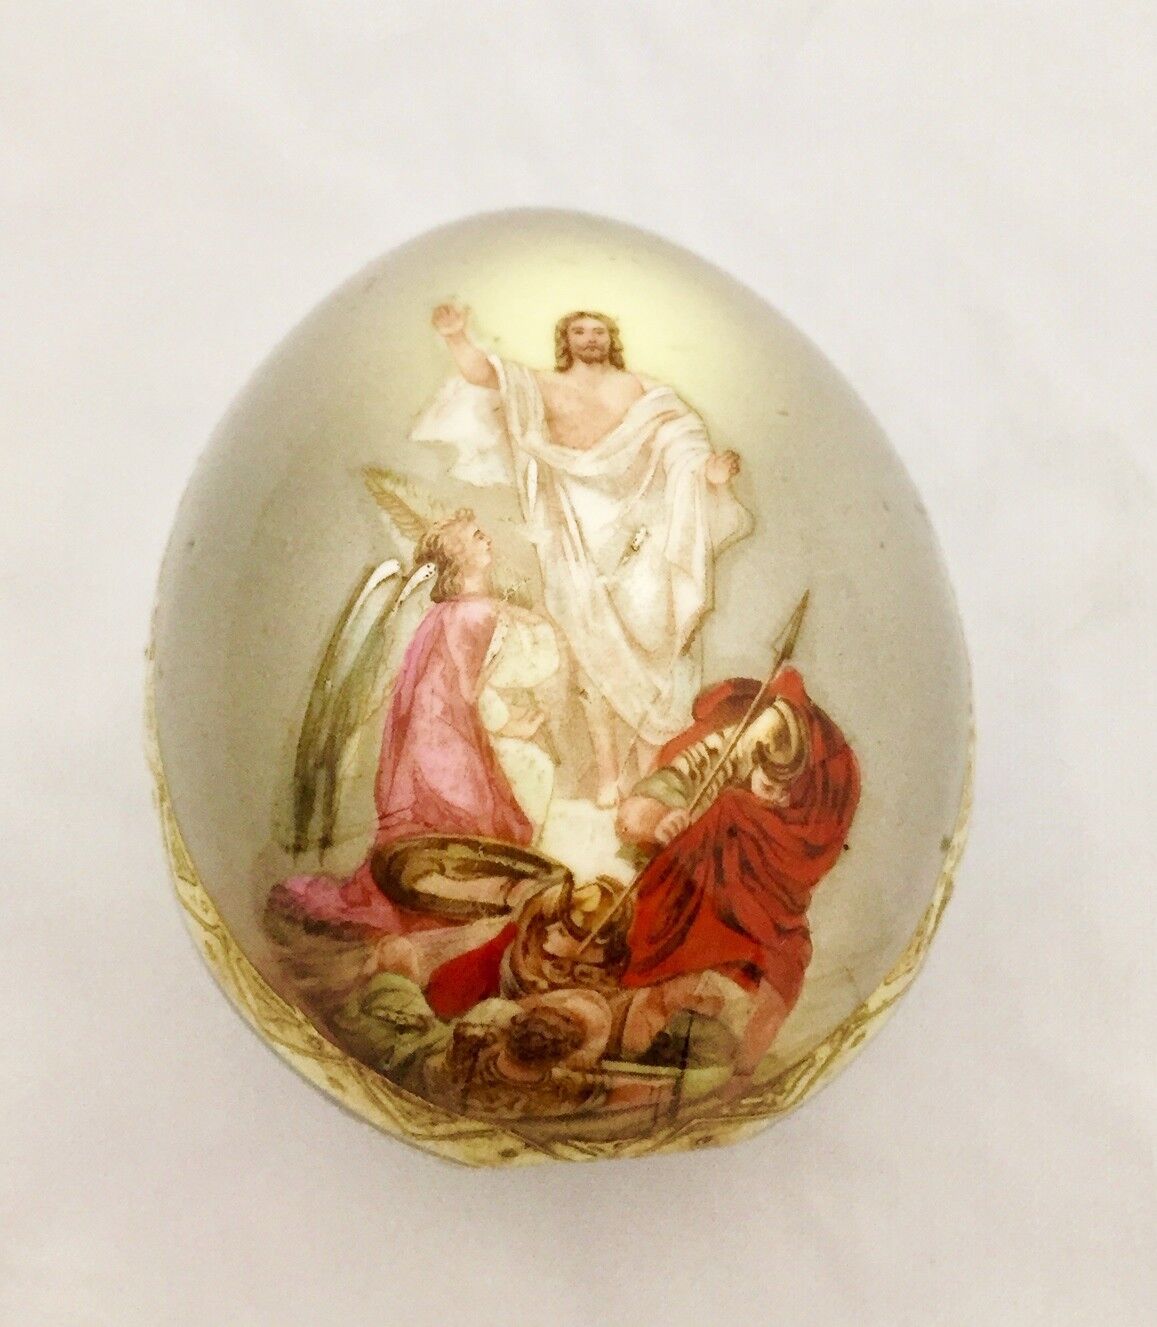  Russian - believed to be Imperial - Porcelain Factory Easter Egg early 1900's